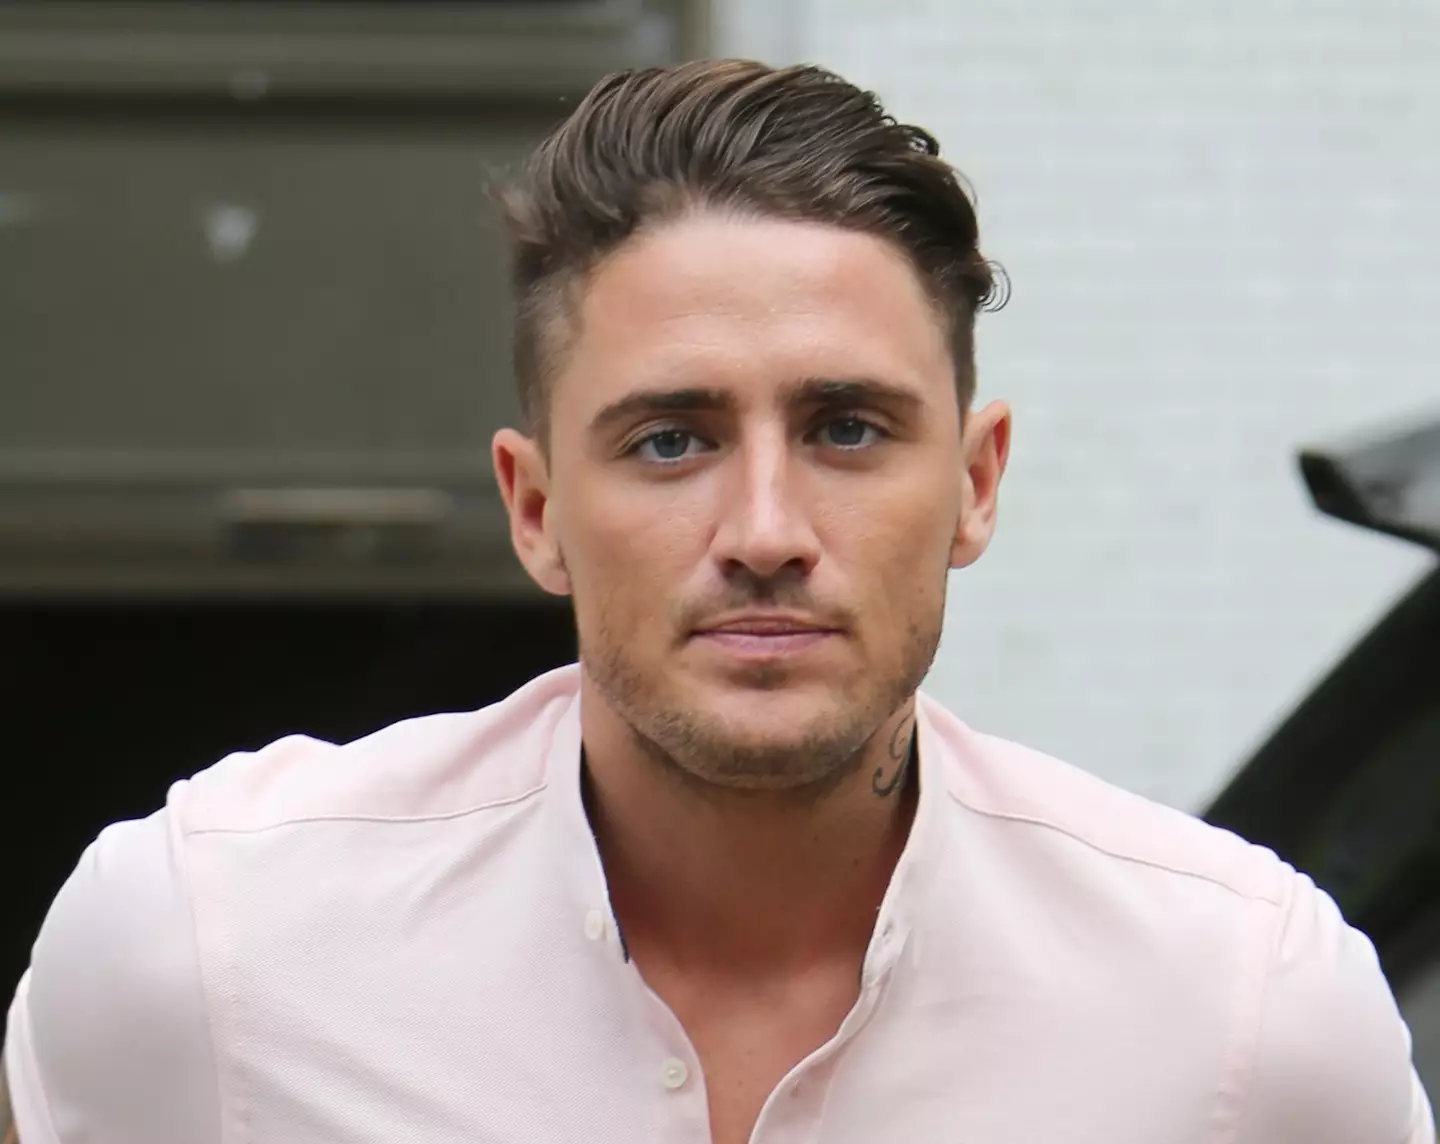 Stephen Bear will have to pay back the money he earned from his OnlyFans video, and if he lacks the cash, then he could have to sell something valuable to afford it.